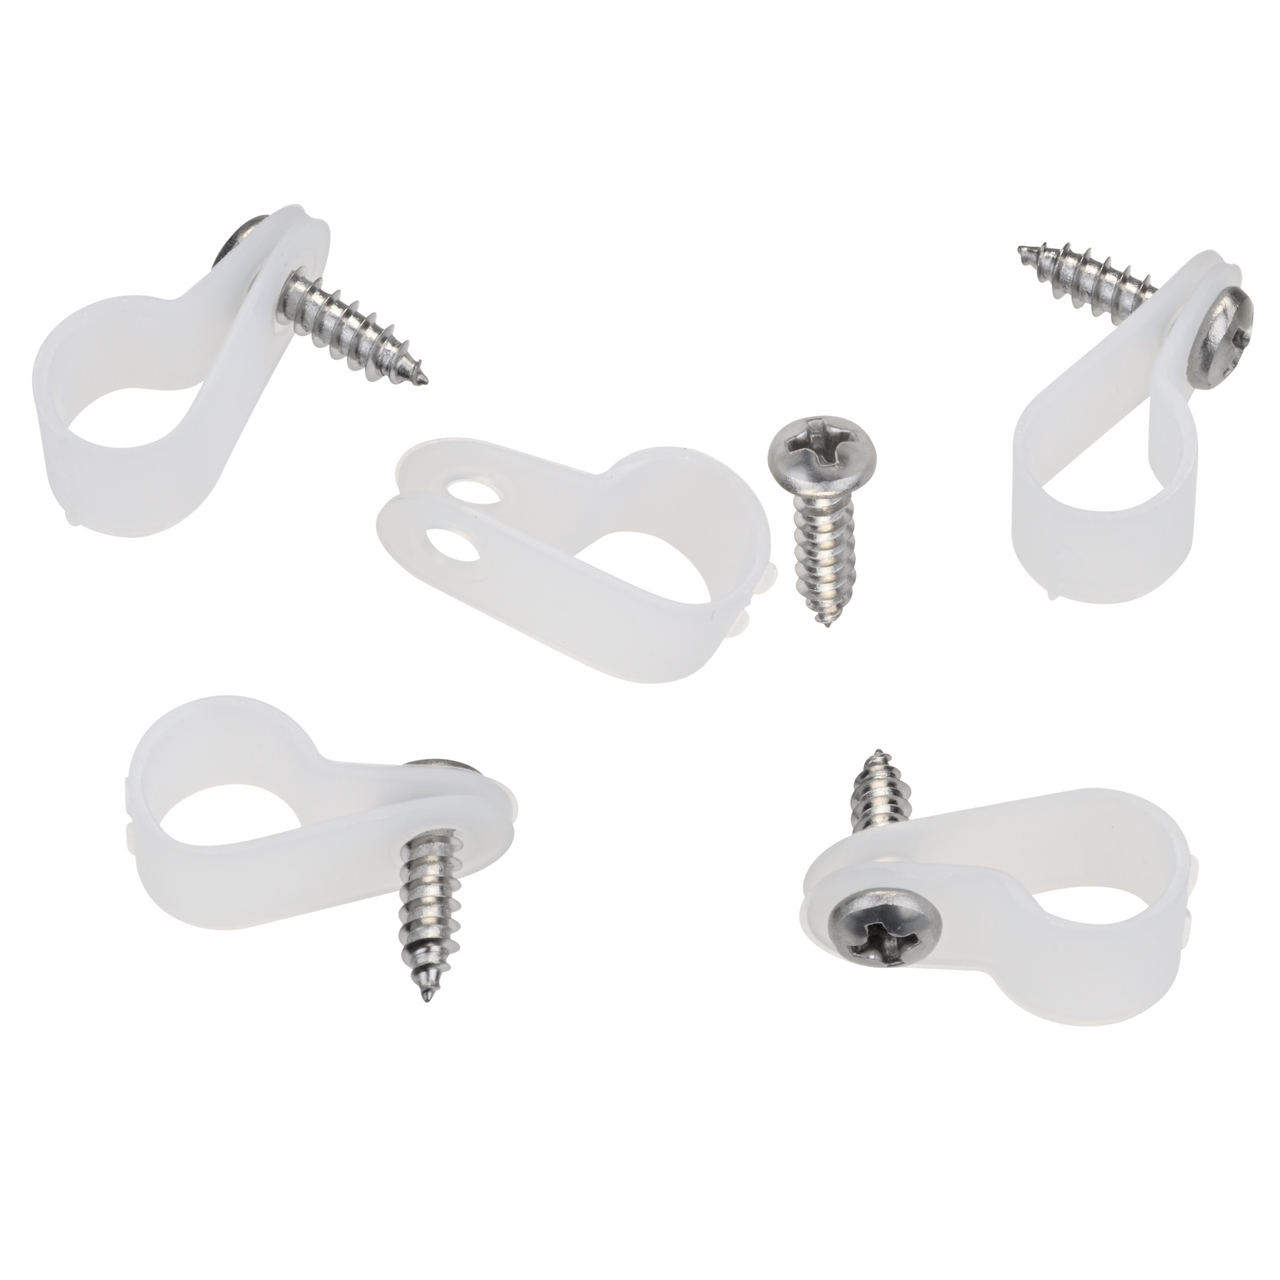 Blade Power Cord Cable Clamps (5 Piece Kit)